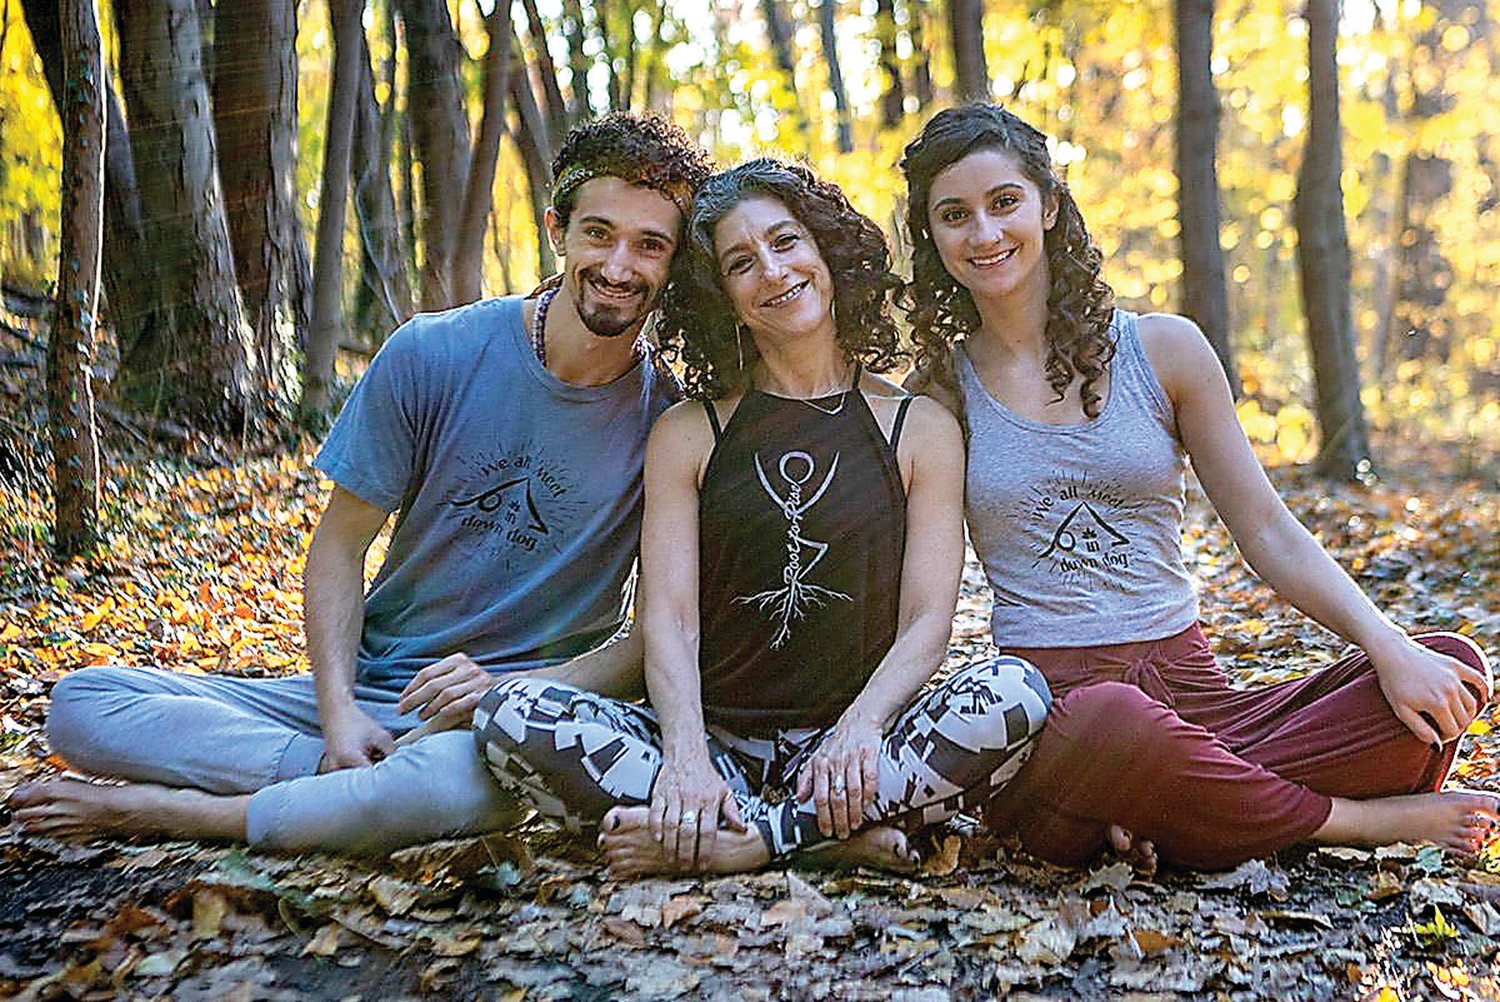 Lauren Otto and her children, Marissa and Seth, are yoga instructors who offer affordable classes in Doylestown.